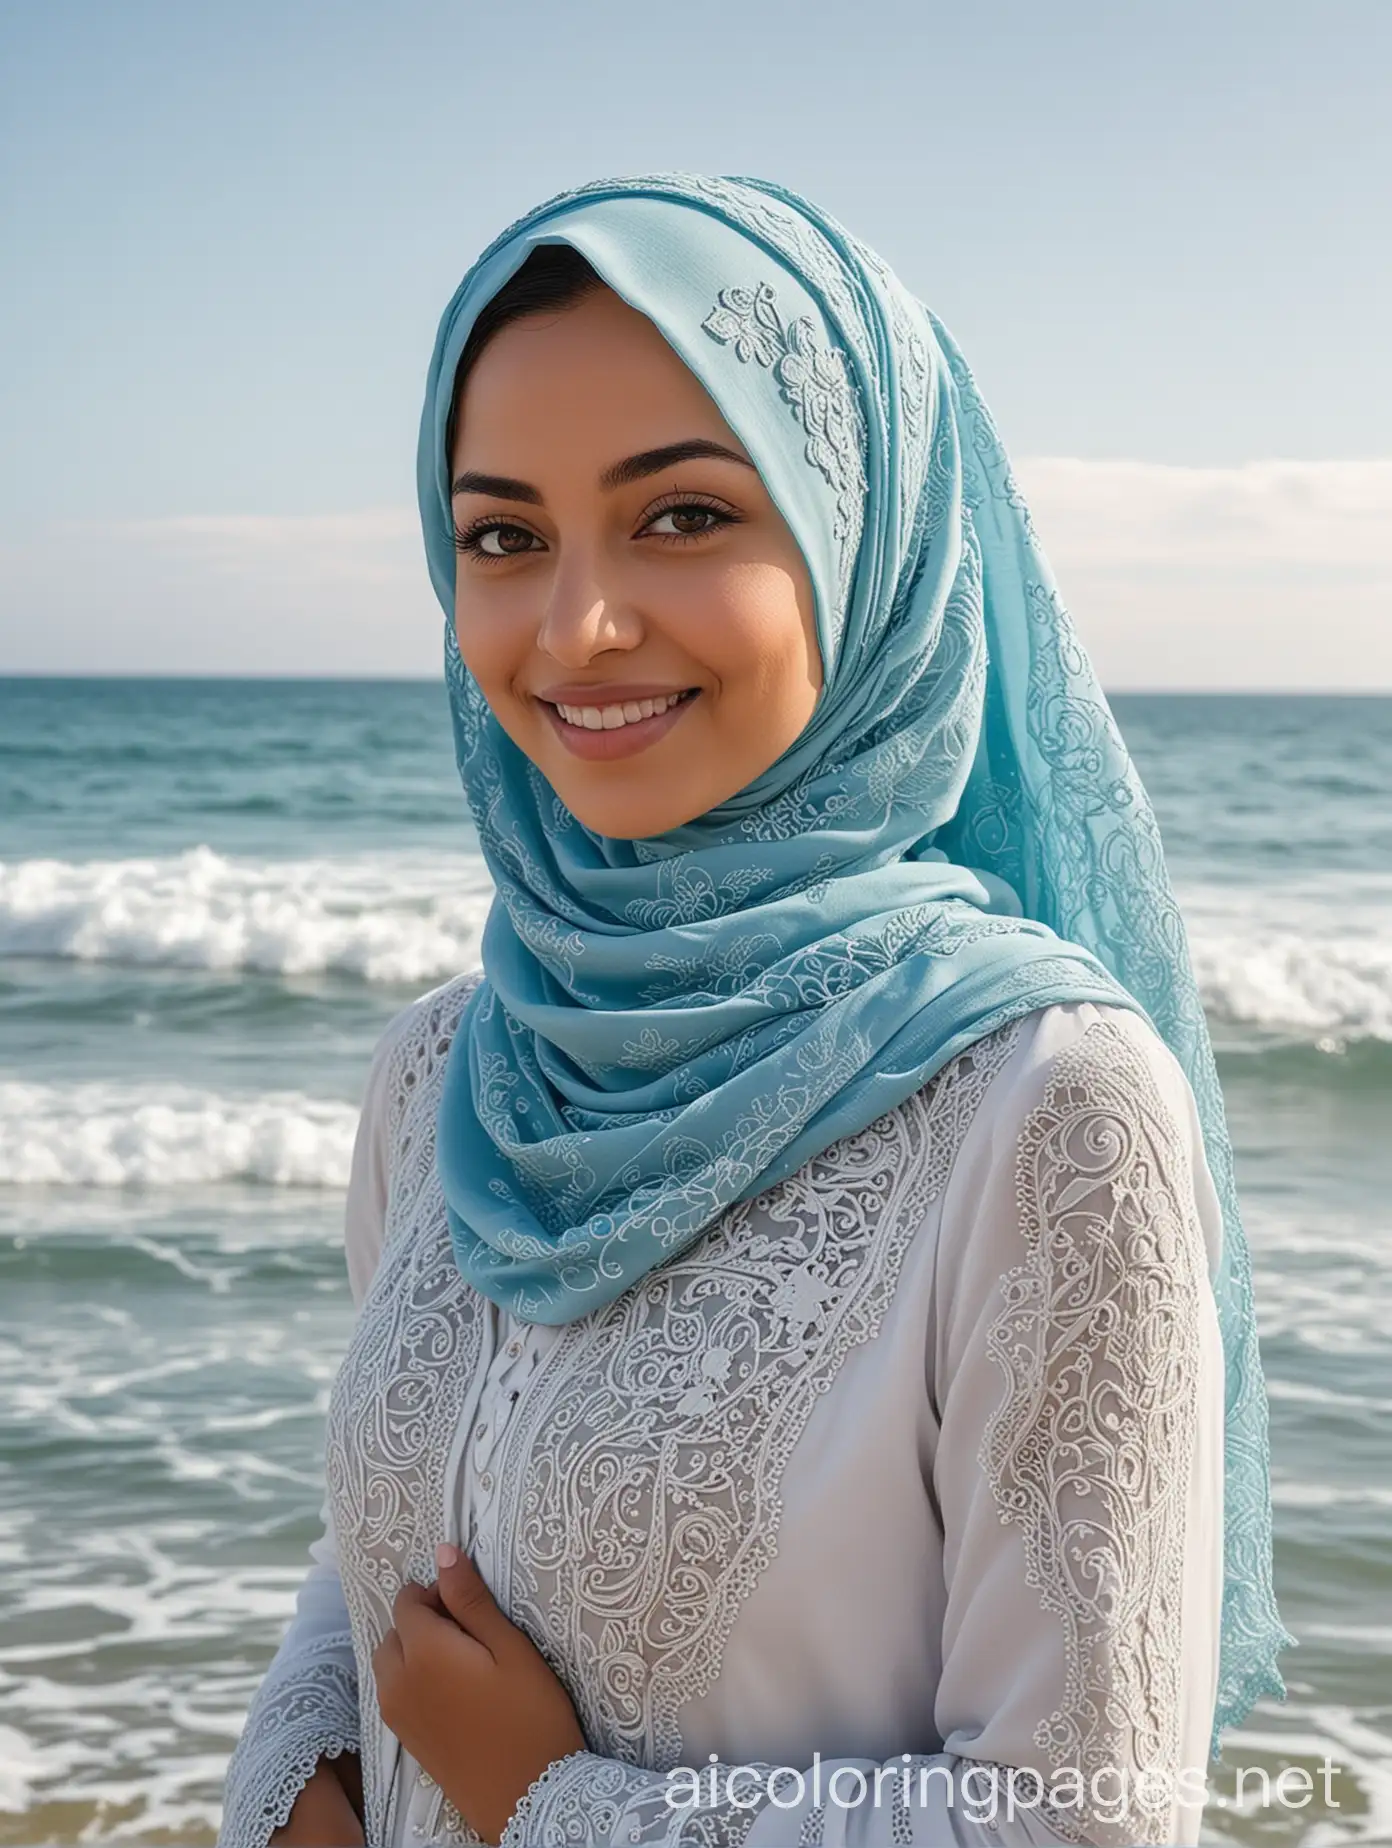 Smiling-Woman-in-Embroidered-Light-Blue-Hijab-by-Serene-Ocean